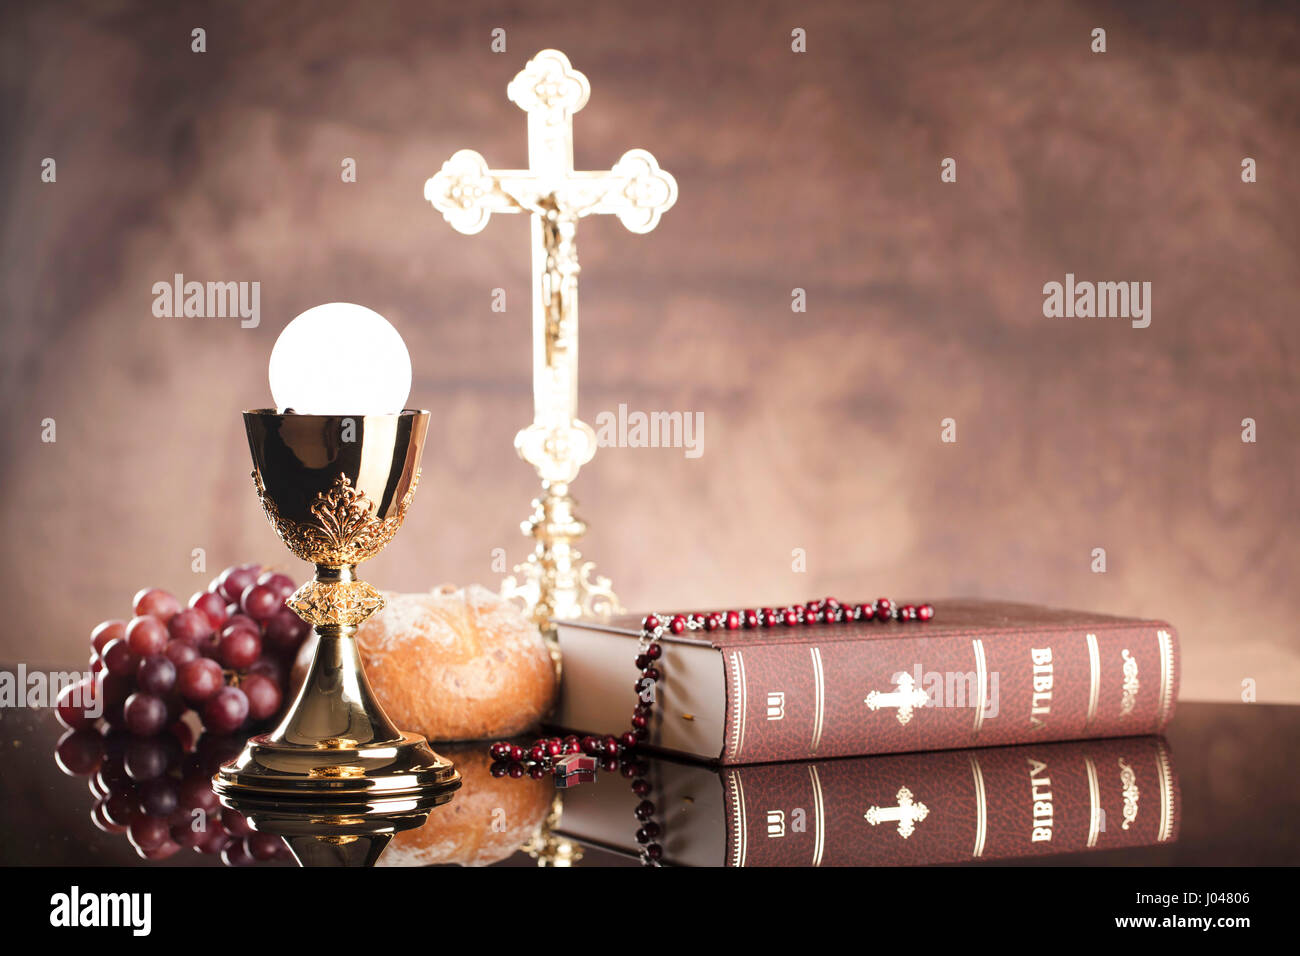 Catholic religion theme.  Holy Bible, the cross and gold chalice on glass table and stone background. Stock Photo